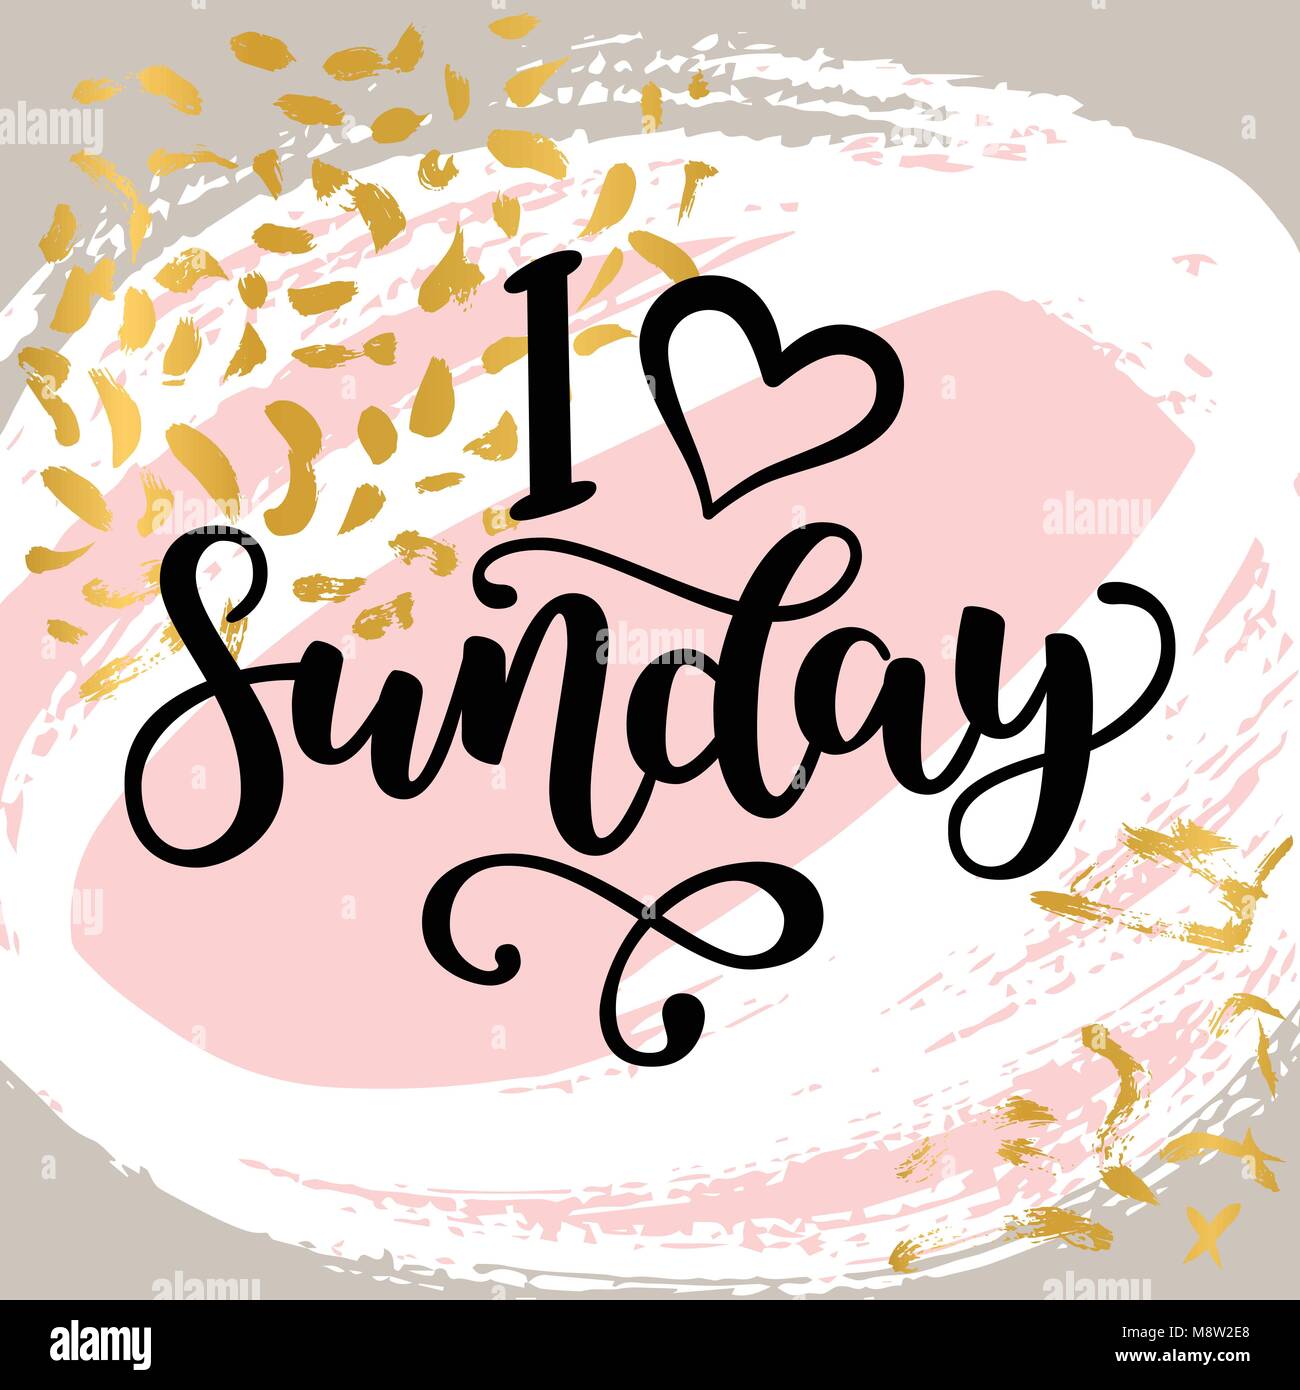 I love sunday. Motivational lettering quote for office workers, start of the week. Modern black brush calligraphy on abstract colorful texture. Positive phrase for social media, cards, wall art Stock Vector